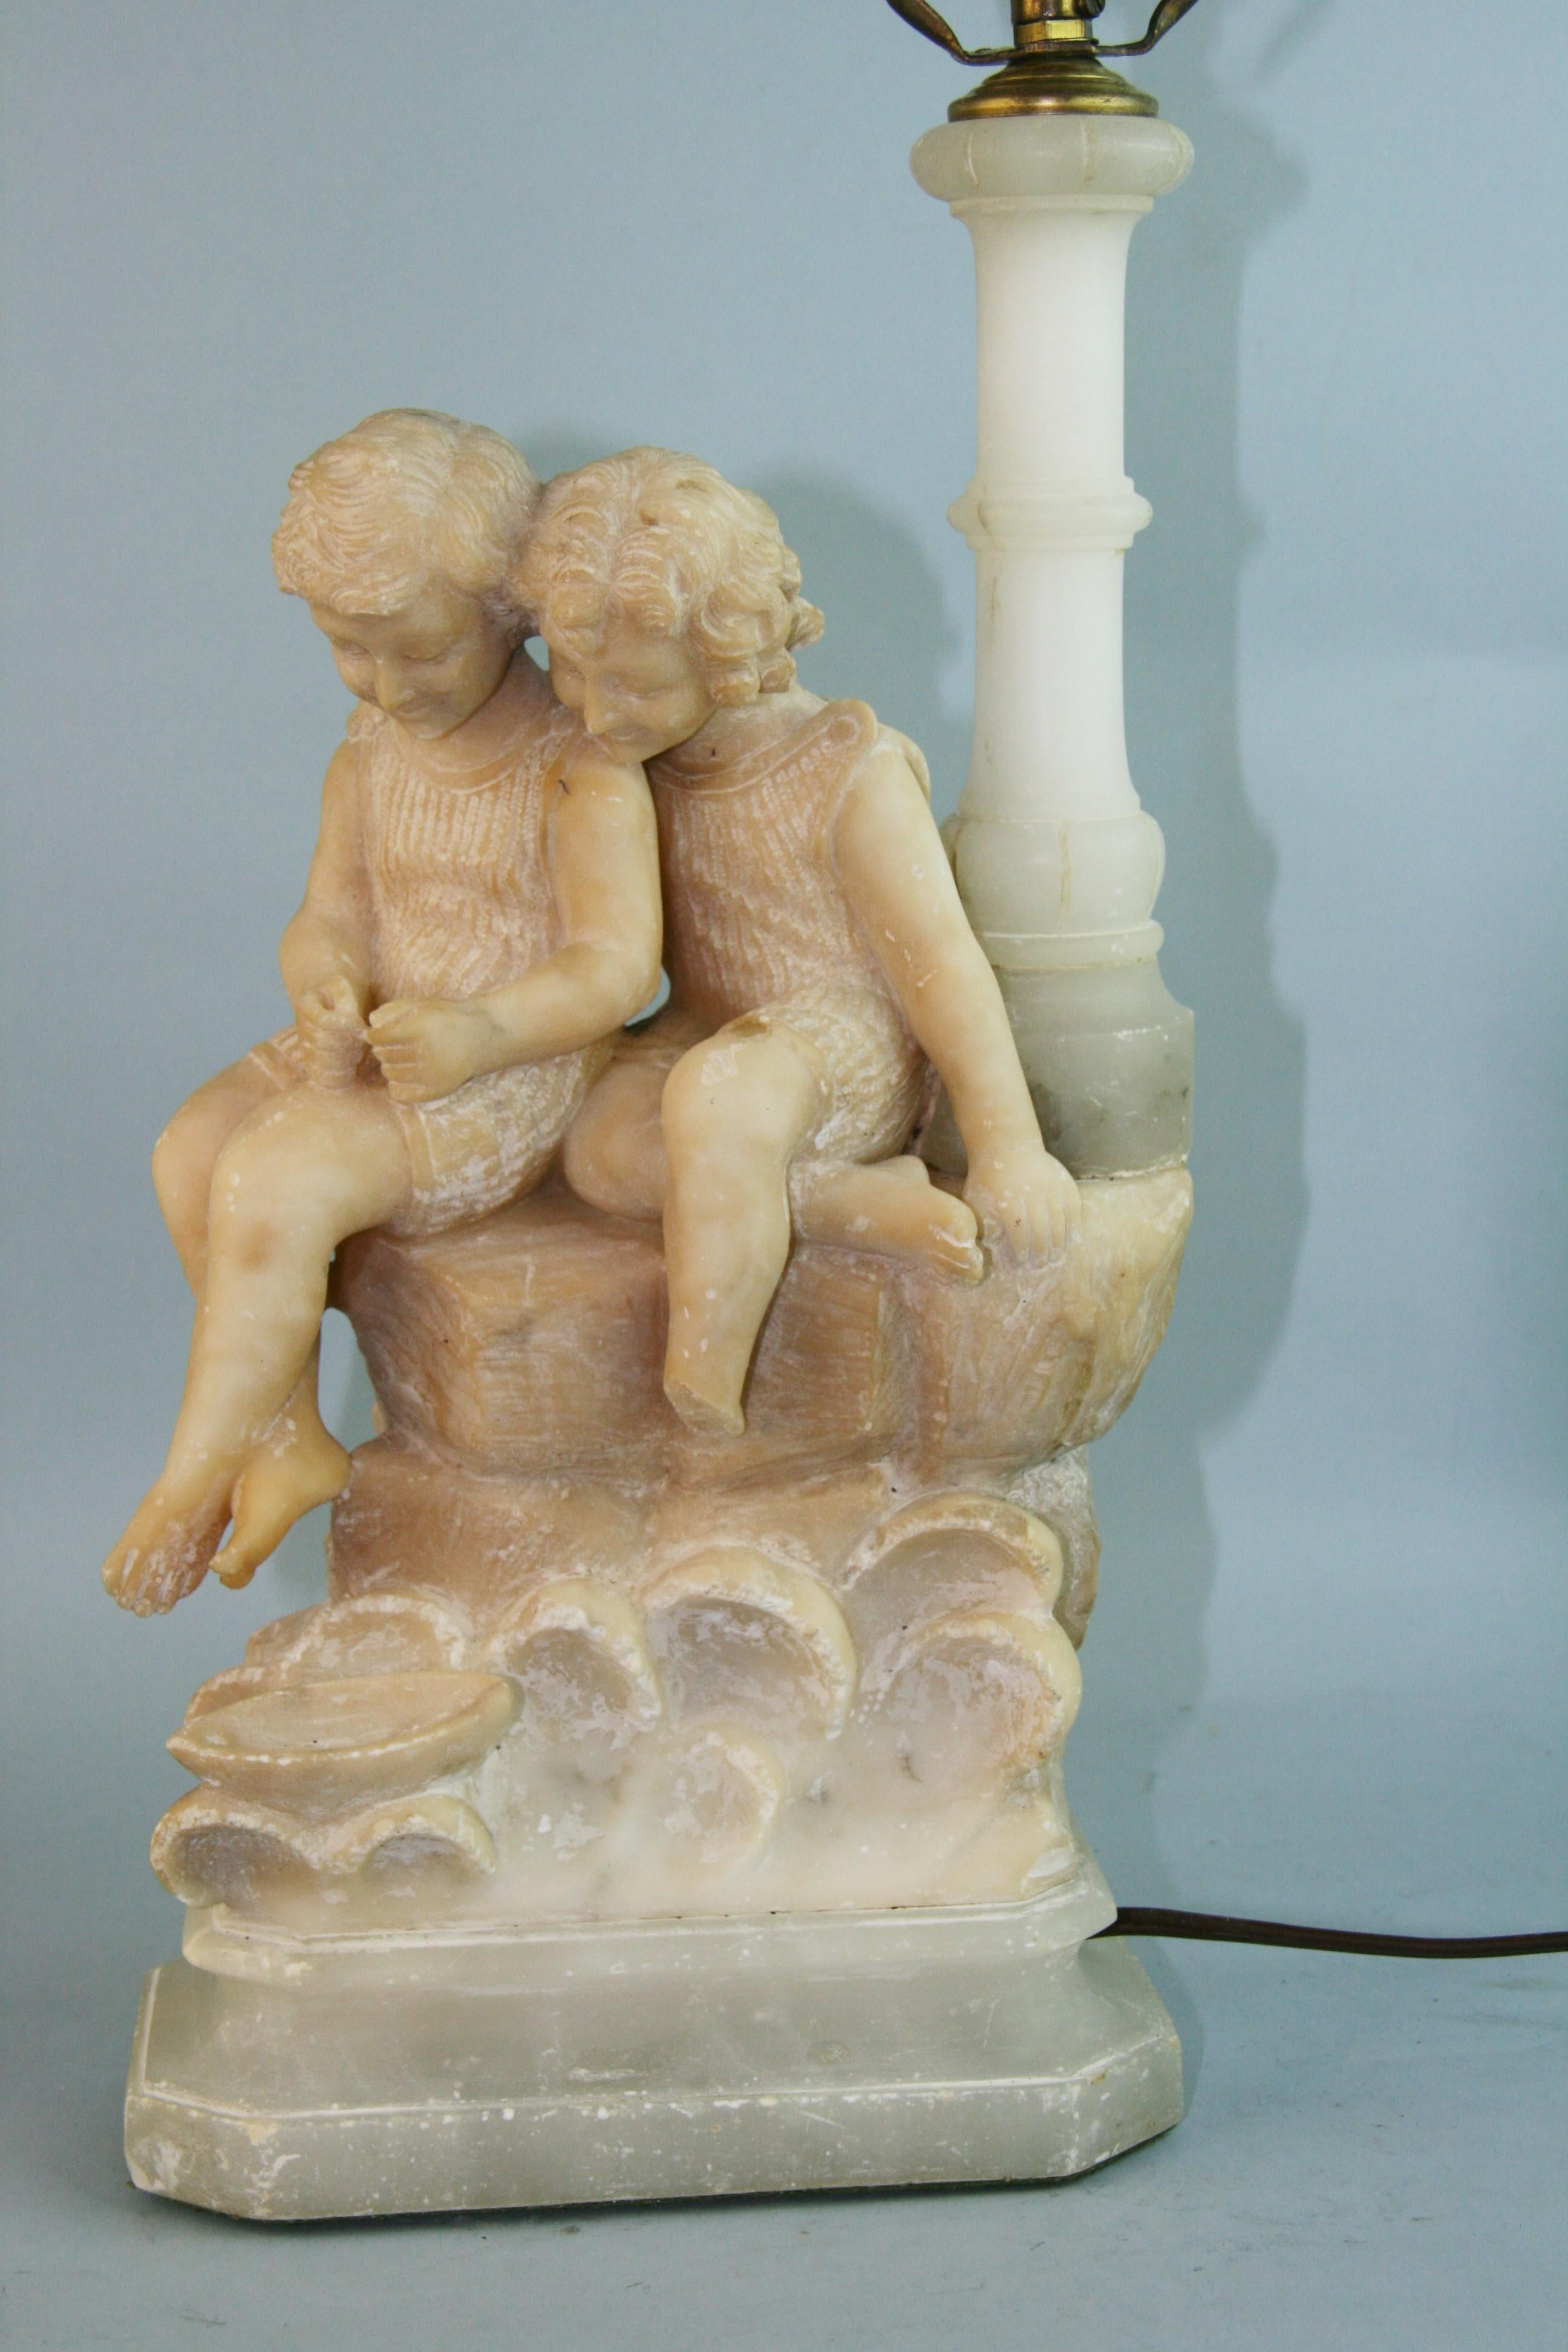 1169 Italian hand carved alabaster sculptural lamp of two children
Existing wiring in working condition
Measures: Height 17